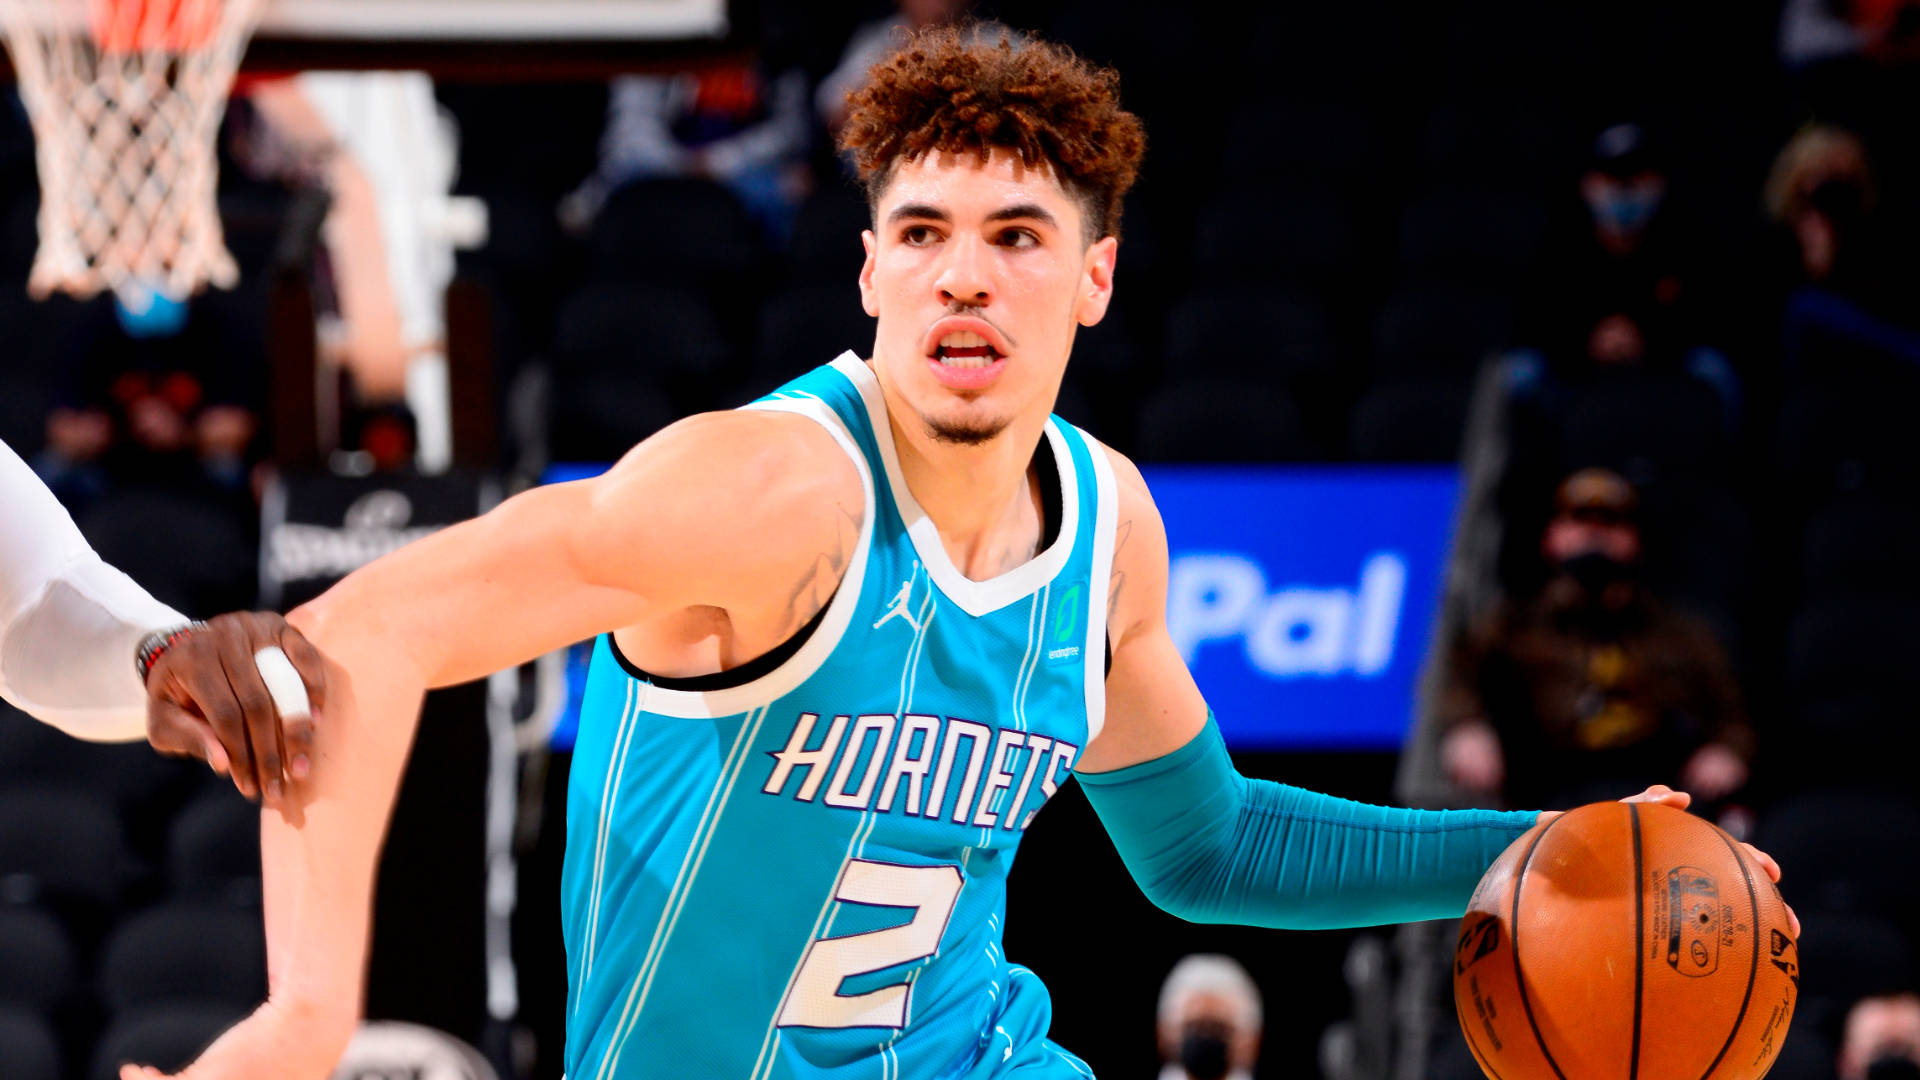 Hornets Lamelo Ball With Ball Background